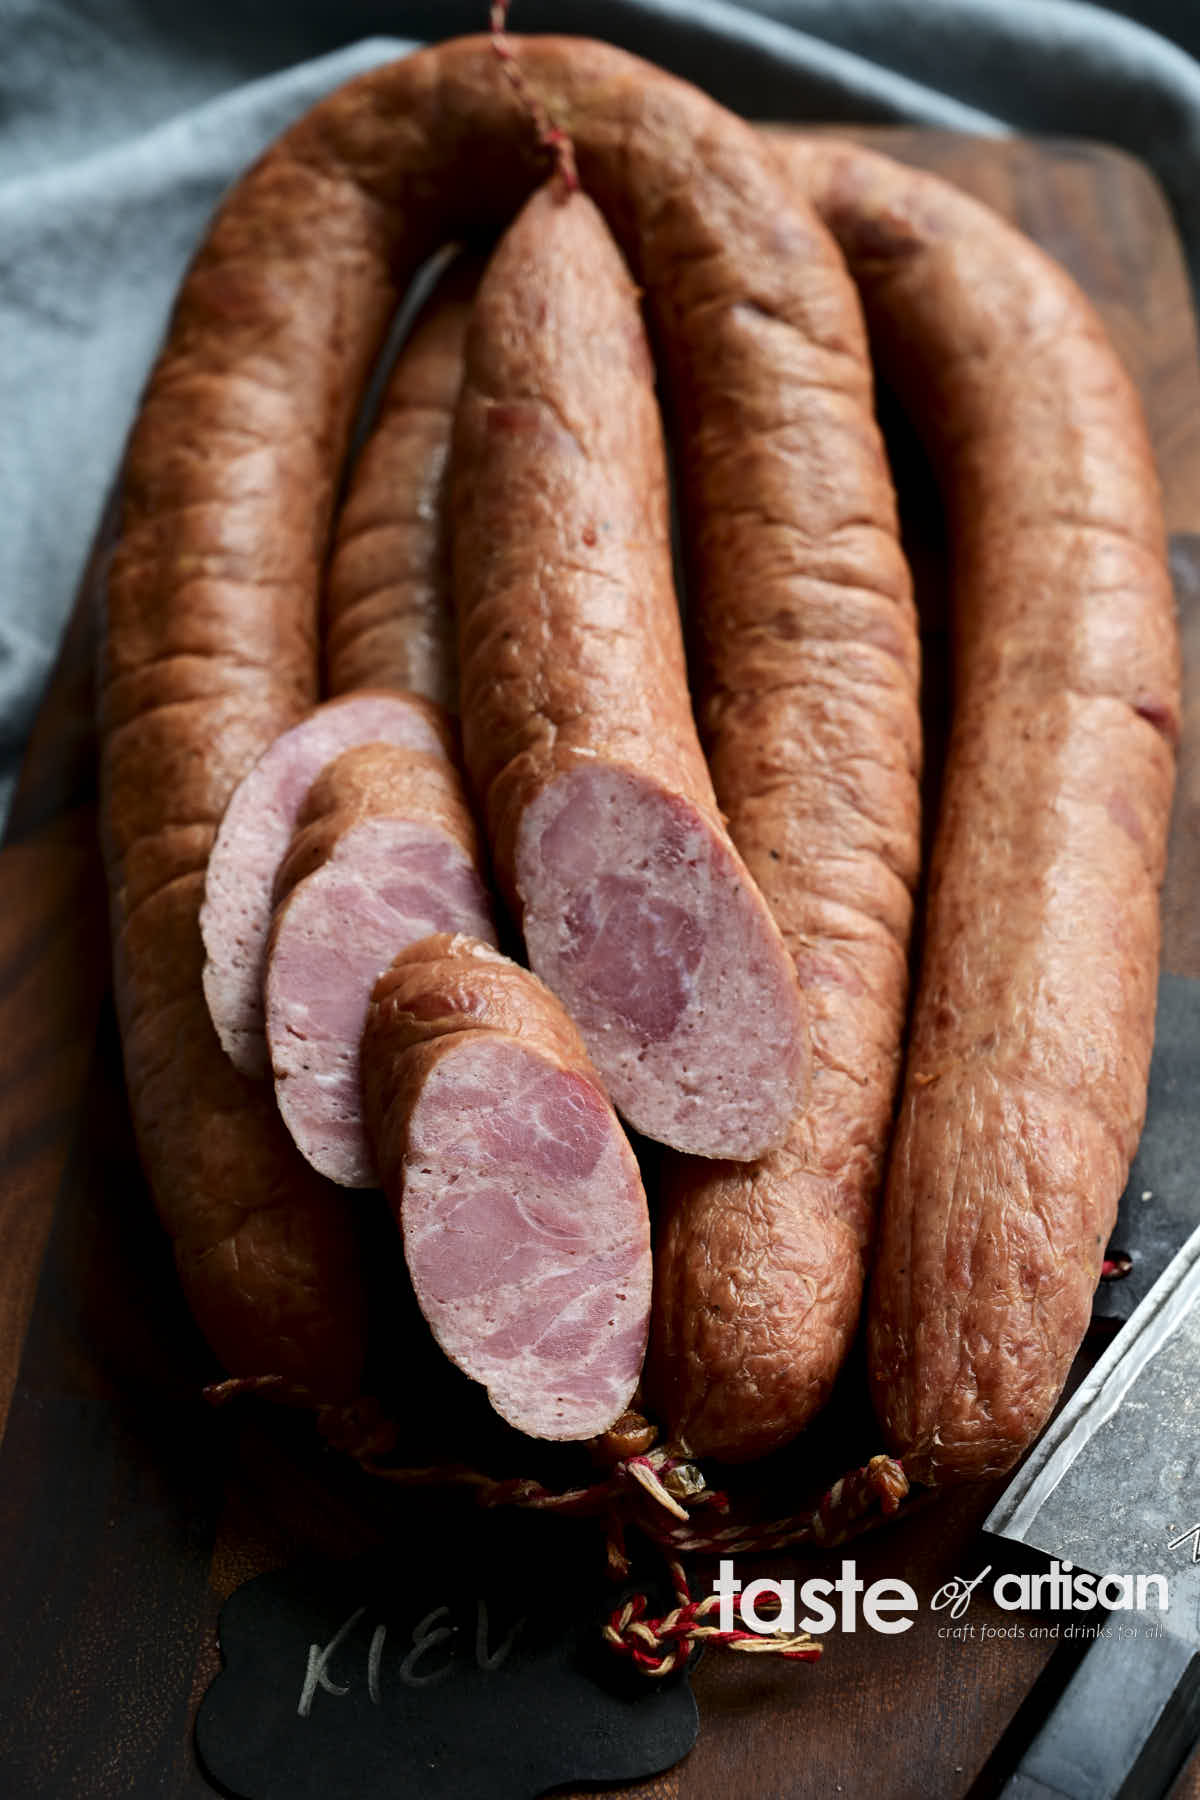 Kyiv smoked sausage is a lightly flavored but exceptionally tasty old-fashioned sausage with a delicate texture made using a new-to-me method whereby the sausage is first cooked and then smoked. You can think of it as a 'reverse-smoked' sausage. This one is a real crowd-pleaser.